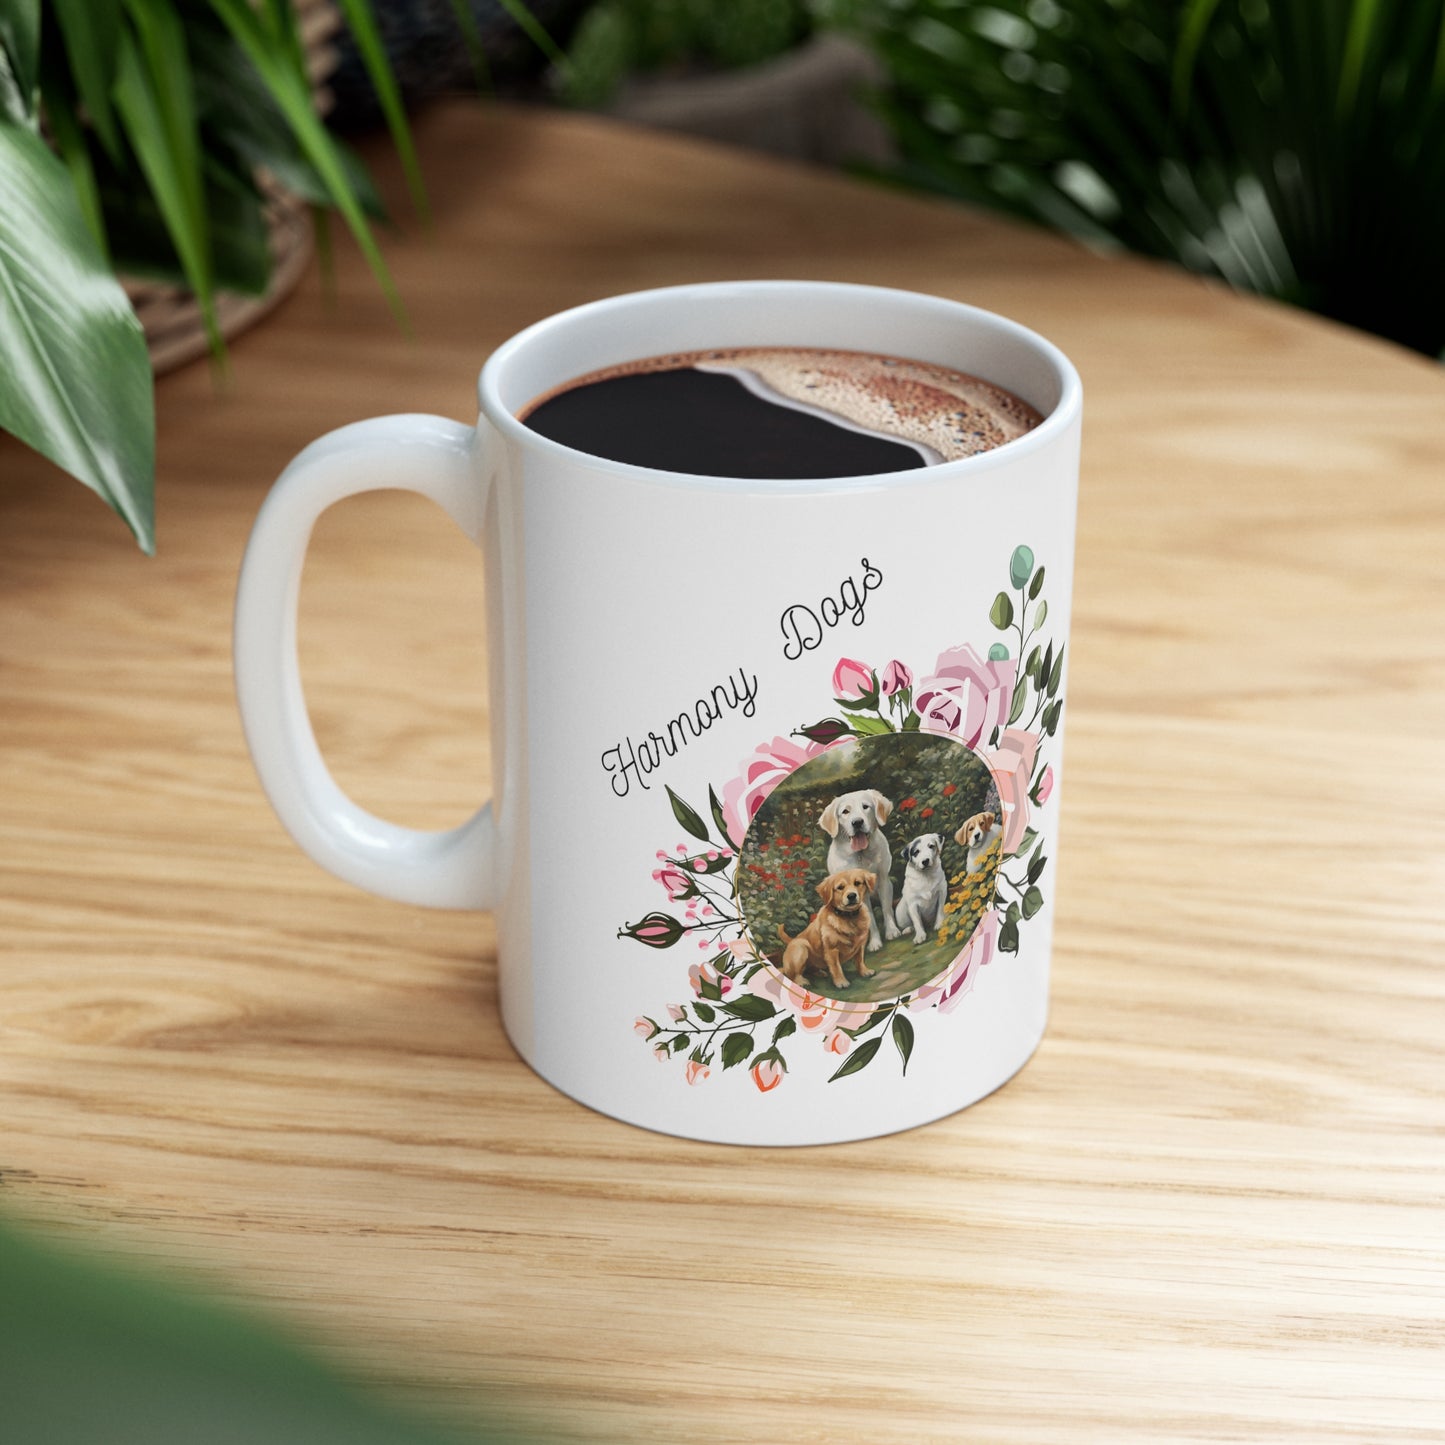 Cat Lady Mug for Dog Moms - "Harmony Dogs, Just Hanging Out" Floral Motif - Ceramic -11oz